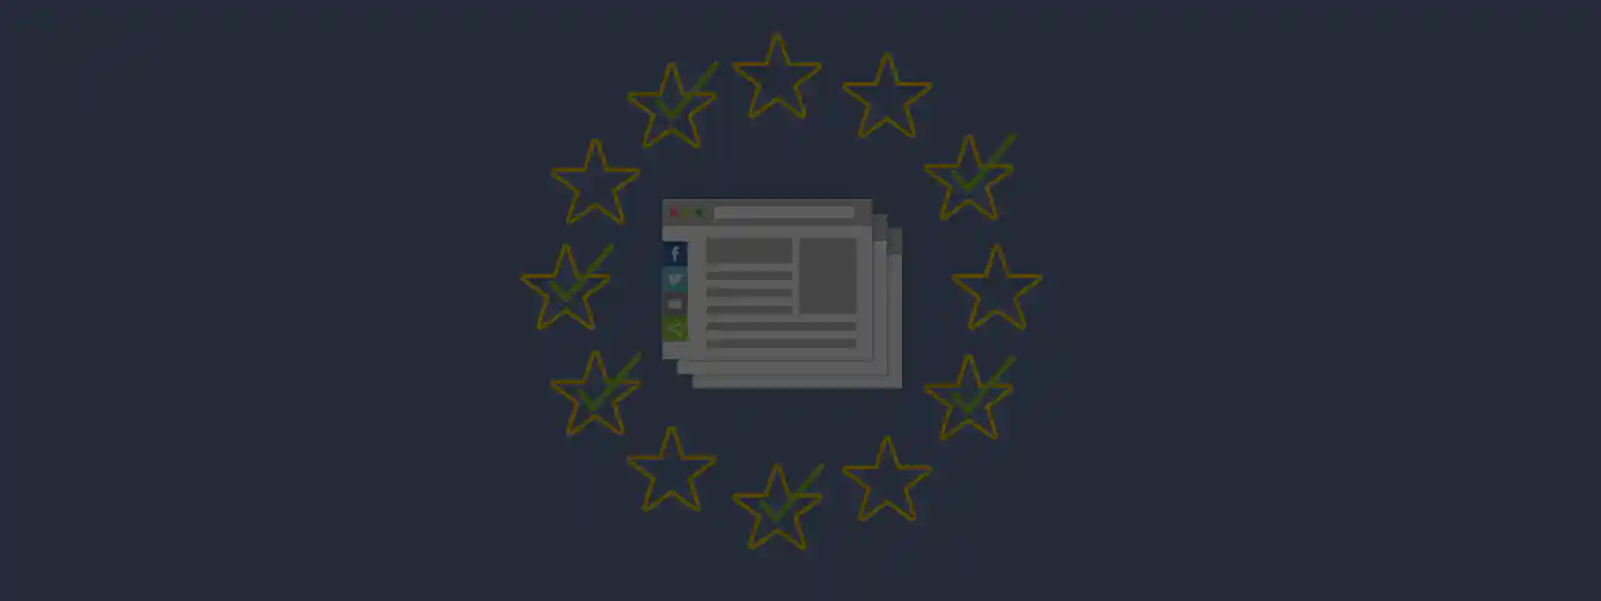 GDPR checklist for publishers & website owners